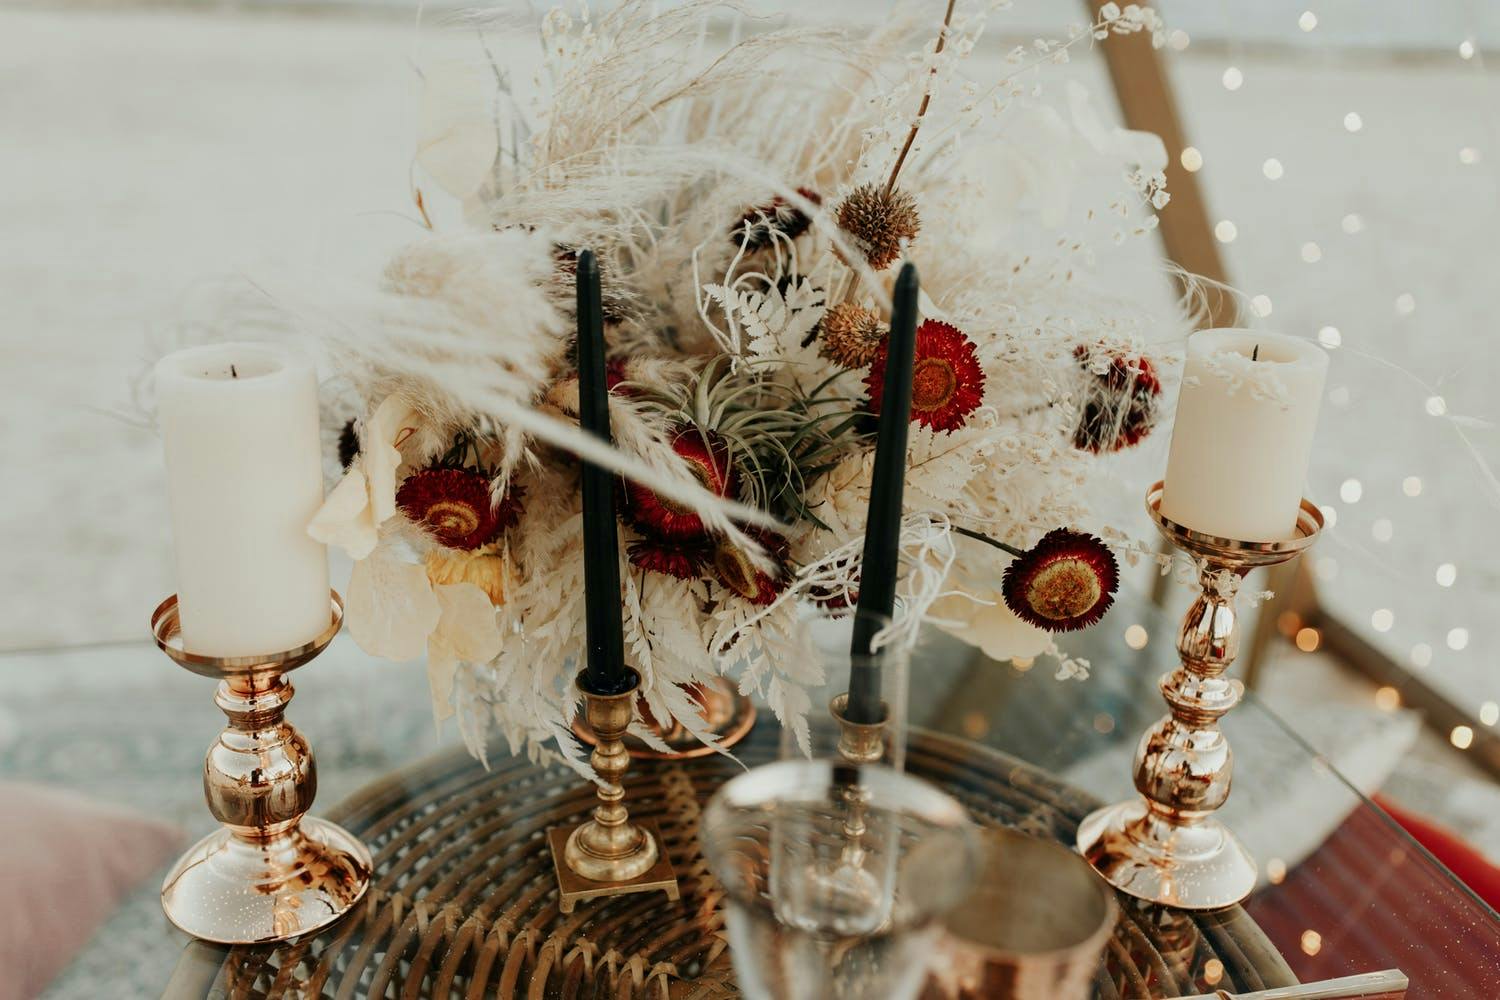 Boho-Chic Beach Wedding Centerpiece With Pampas Grass and Black Tallow Candles | PartySlate